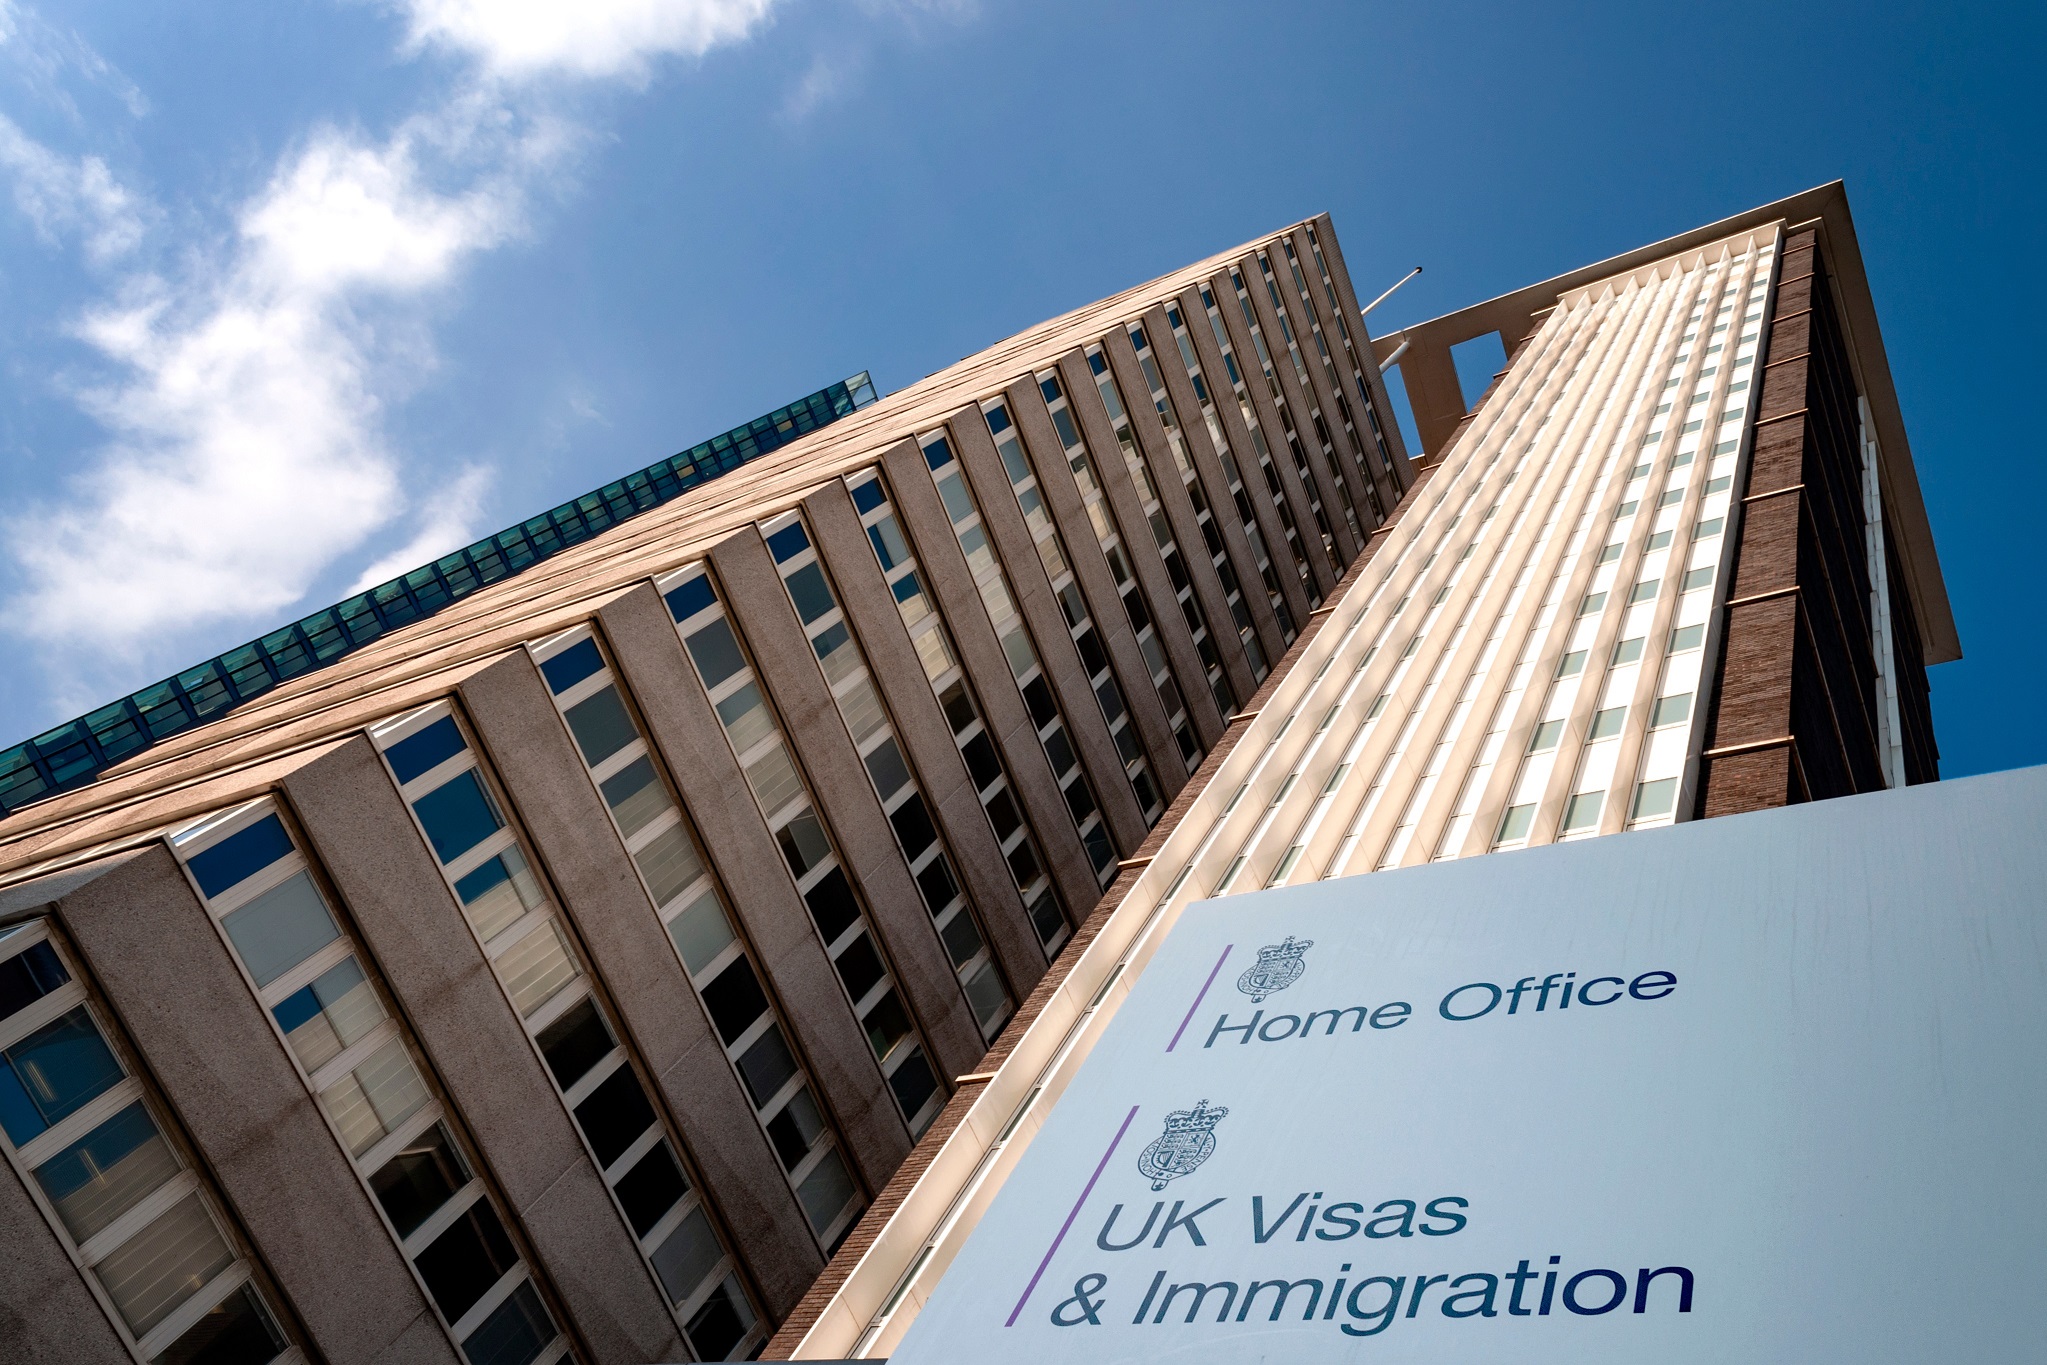 Home Office ‘Sponsorship Roadmap’ sets out future reforms